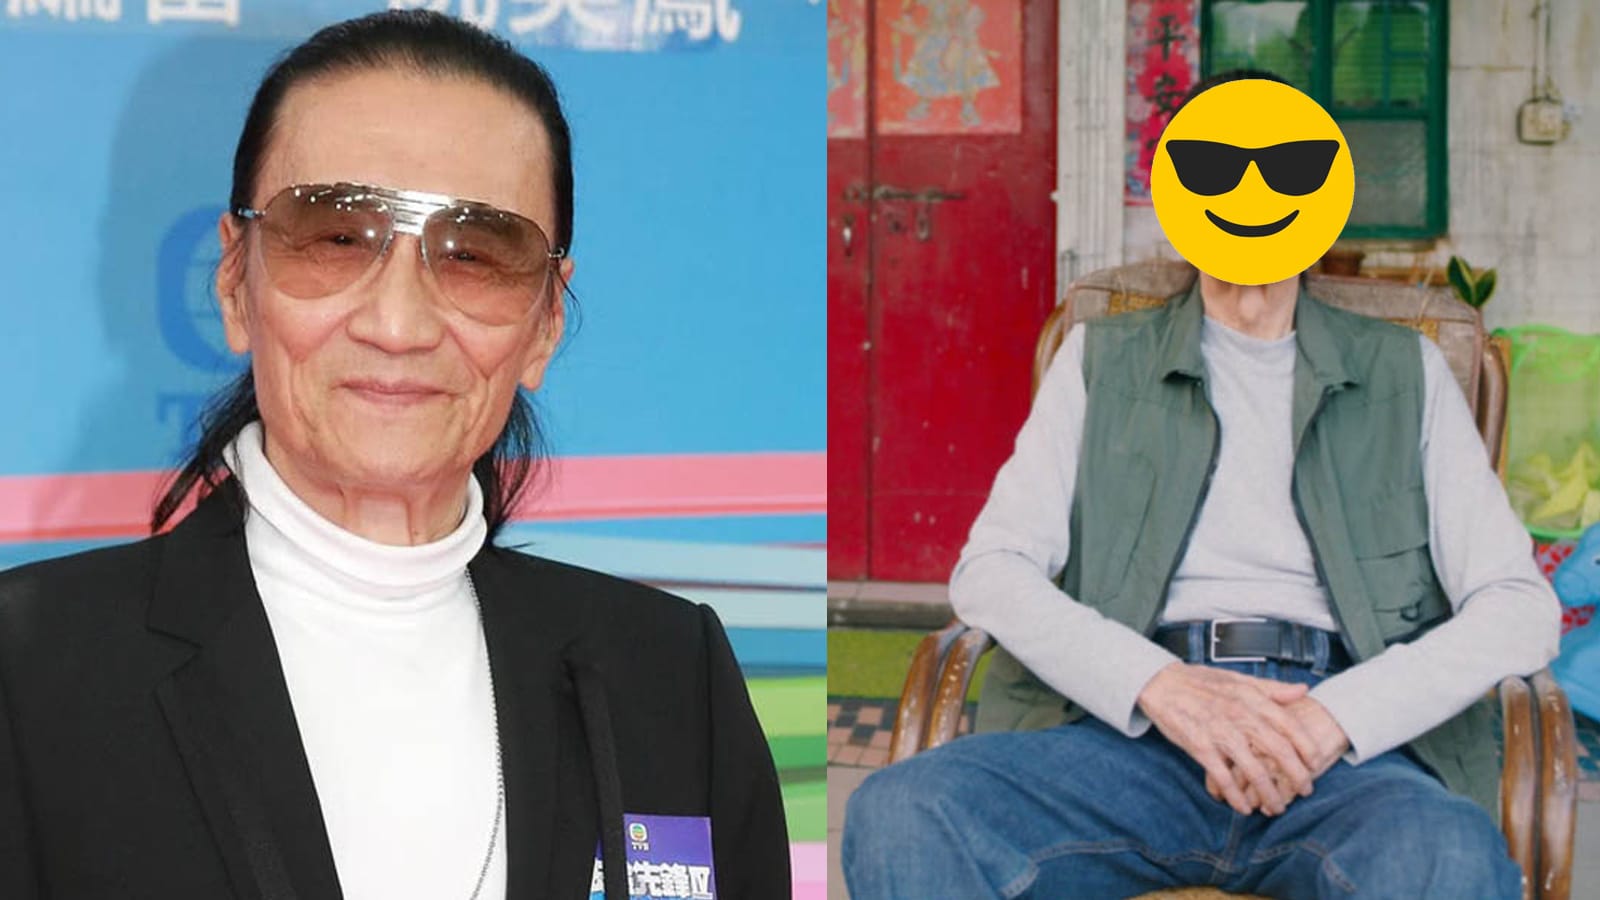 This Is What Patrick Tse, 84, Looks Like Without His Sunglasses